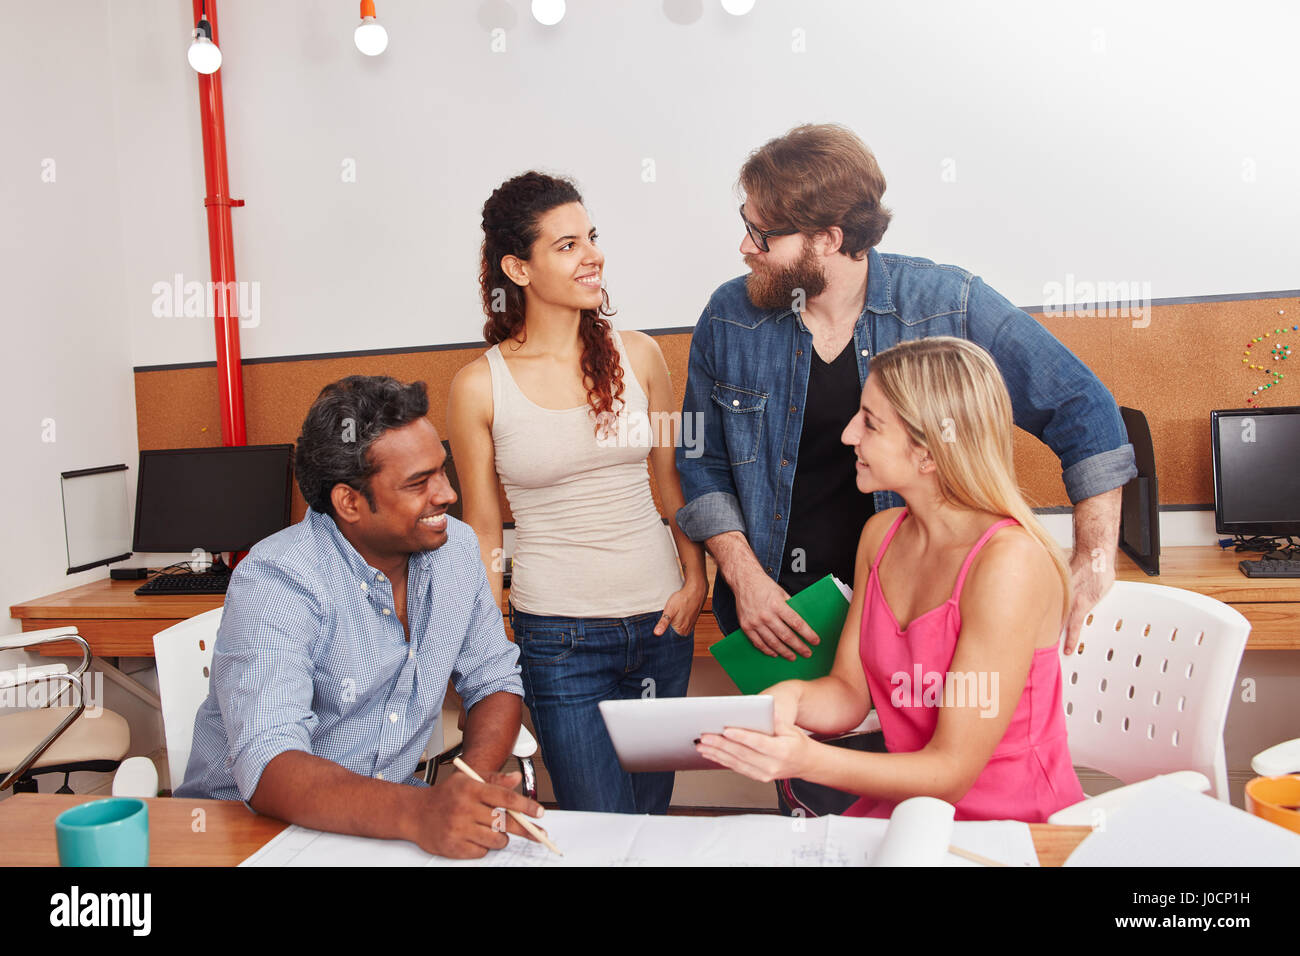 Students as startup team in discussion at meeting Stock Photo